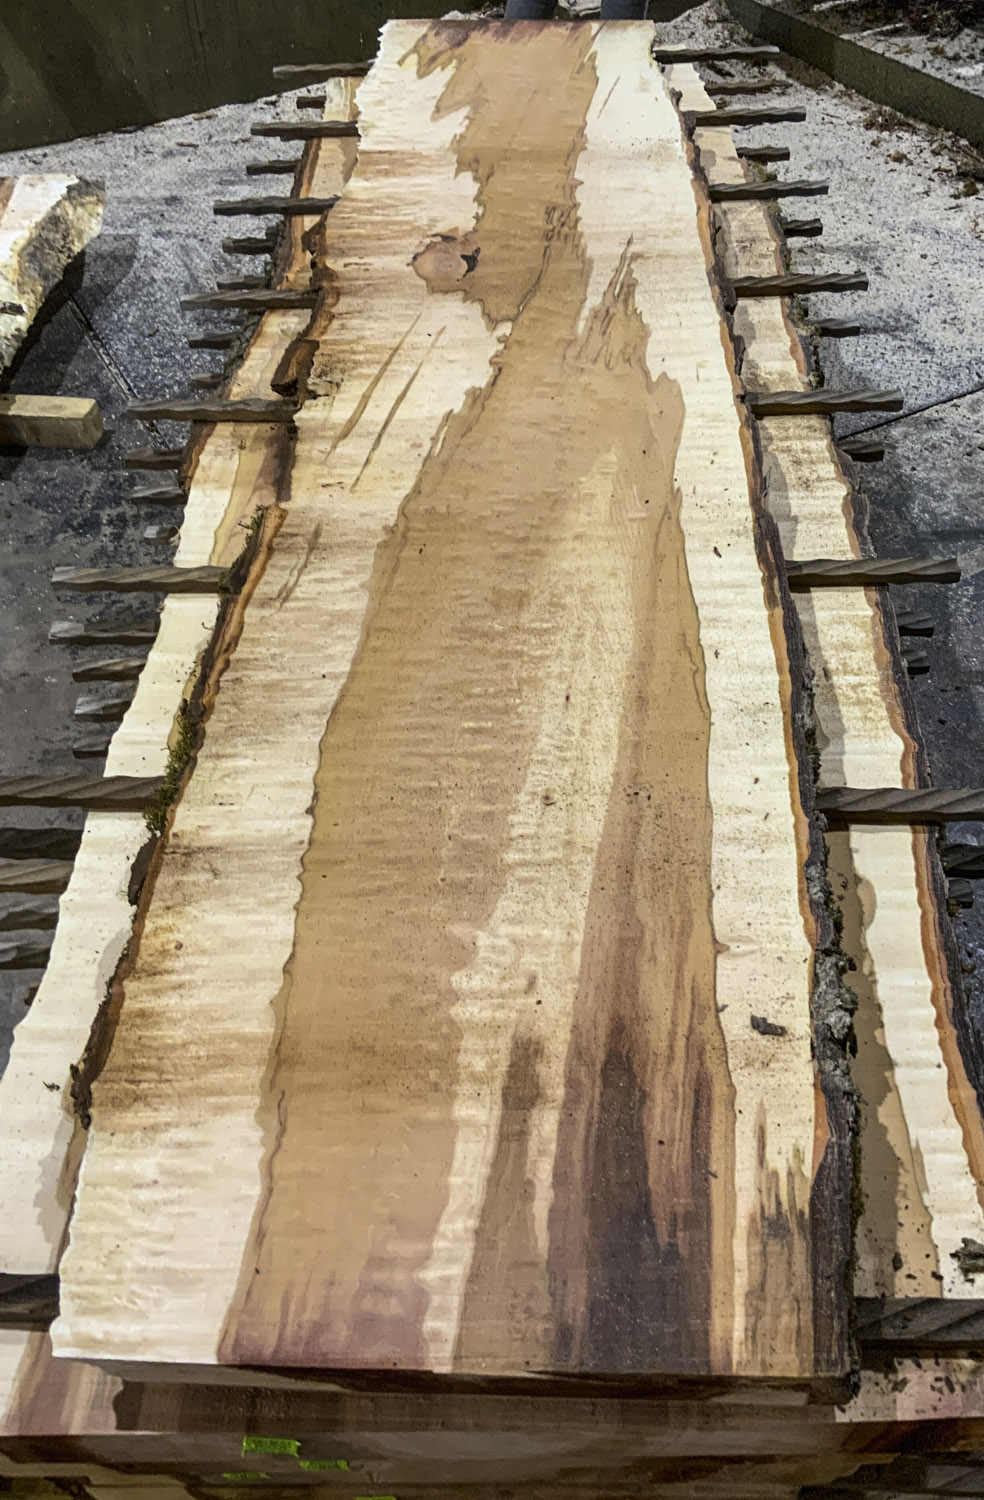 Heartwood in Maple is considered "undesirable" by many... but check out these amazing slabs we cut this week - the contrast between the heart and sap is so wild it almost looks like paint.